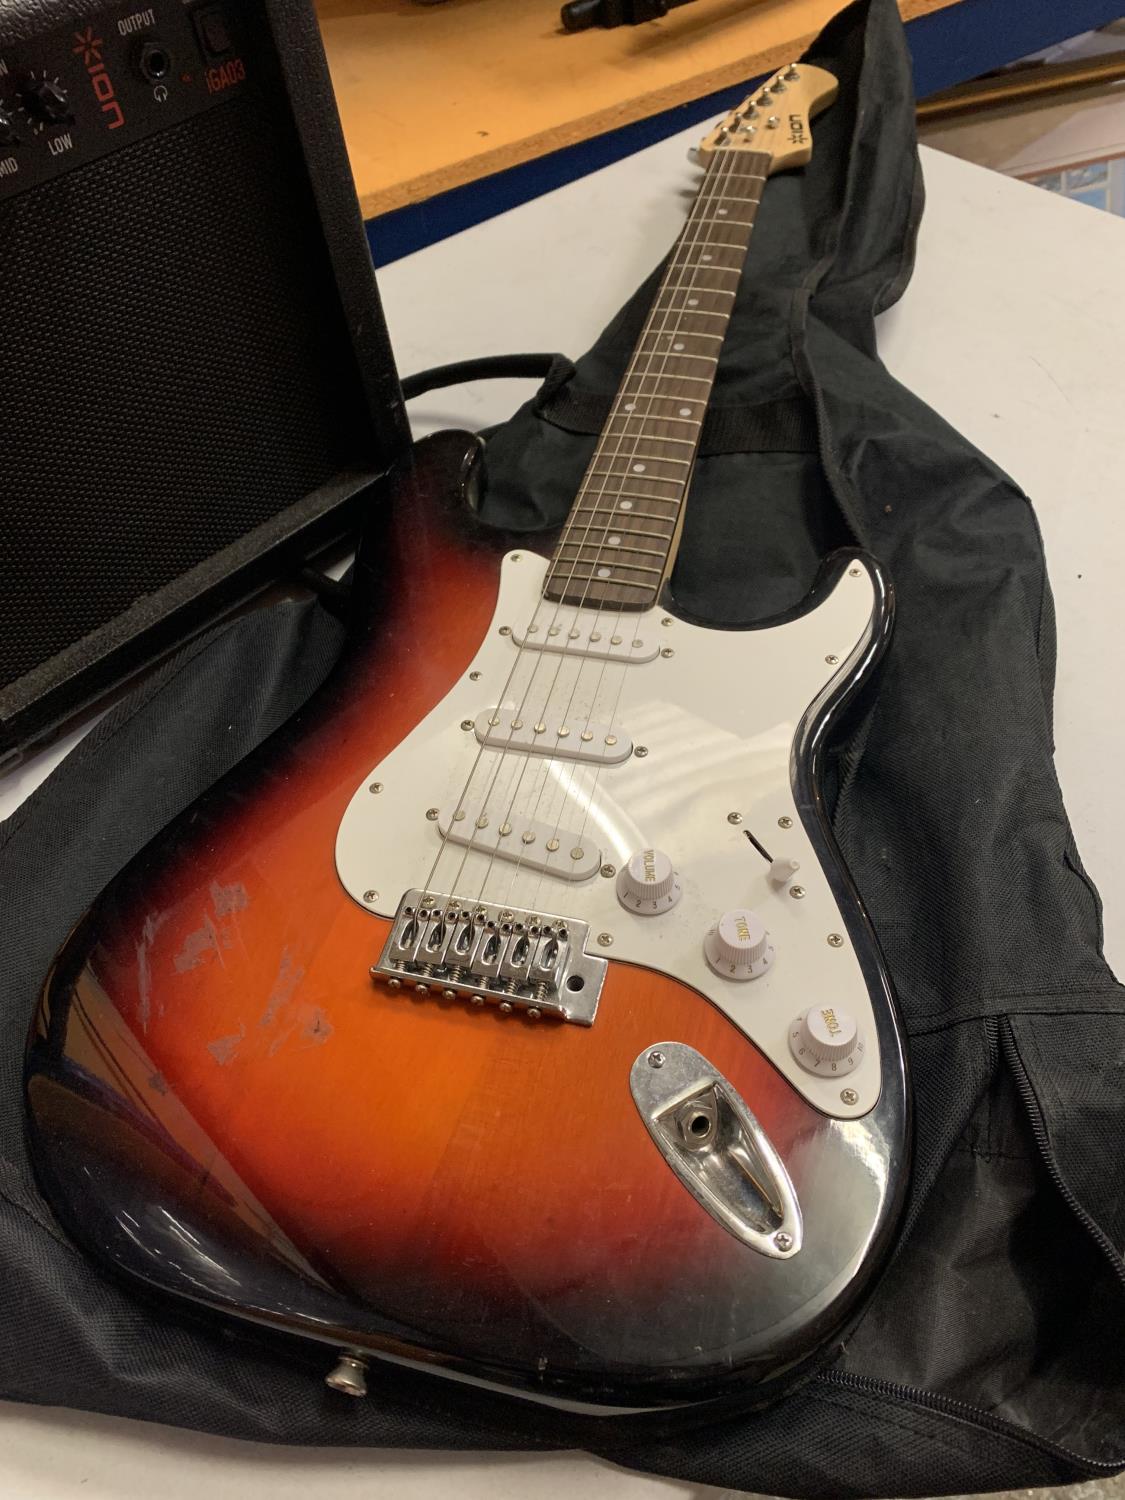 AN ION ELECTRIC GUITAR WITH CARRYING CASE AND AMPLIFIER - Image 2 of 5